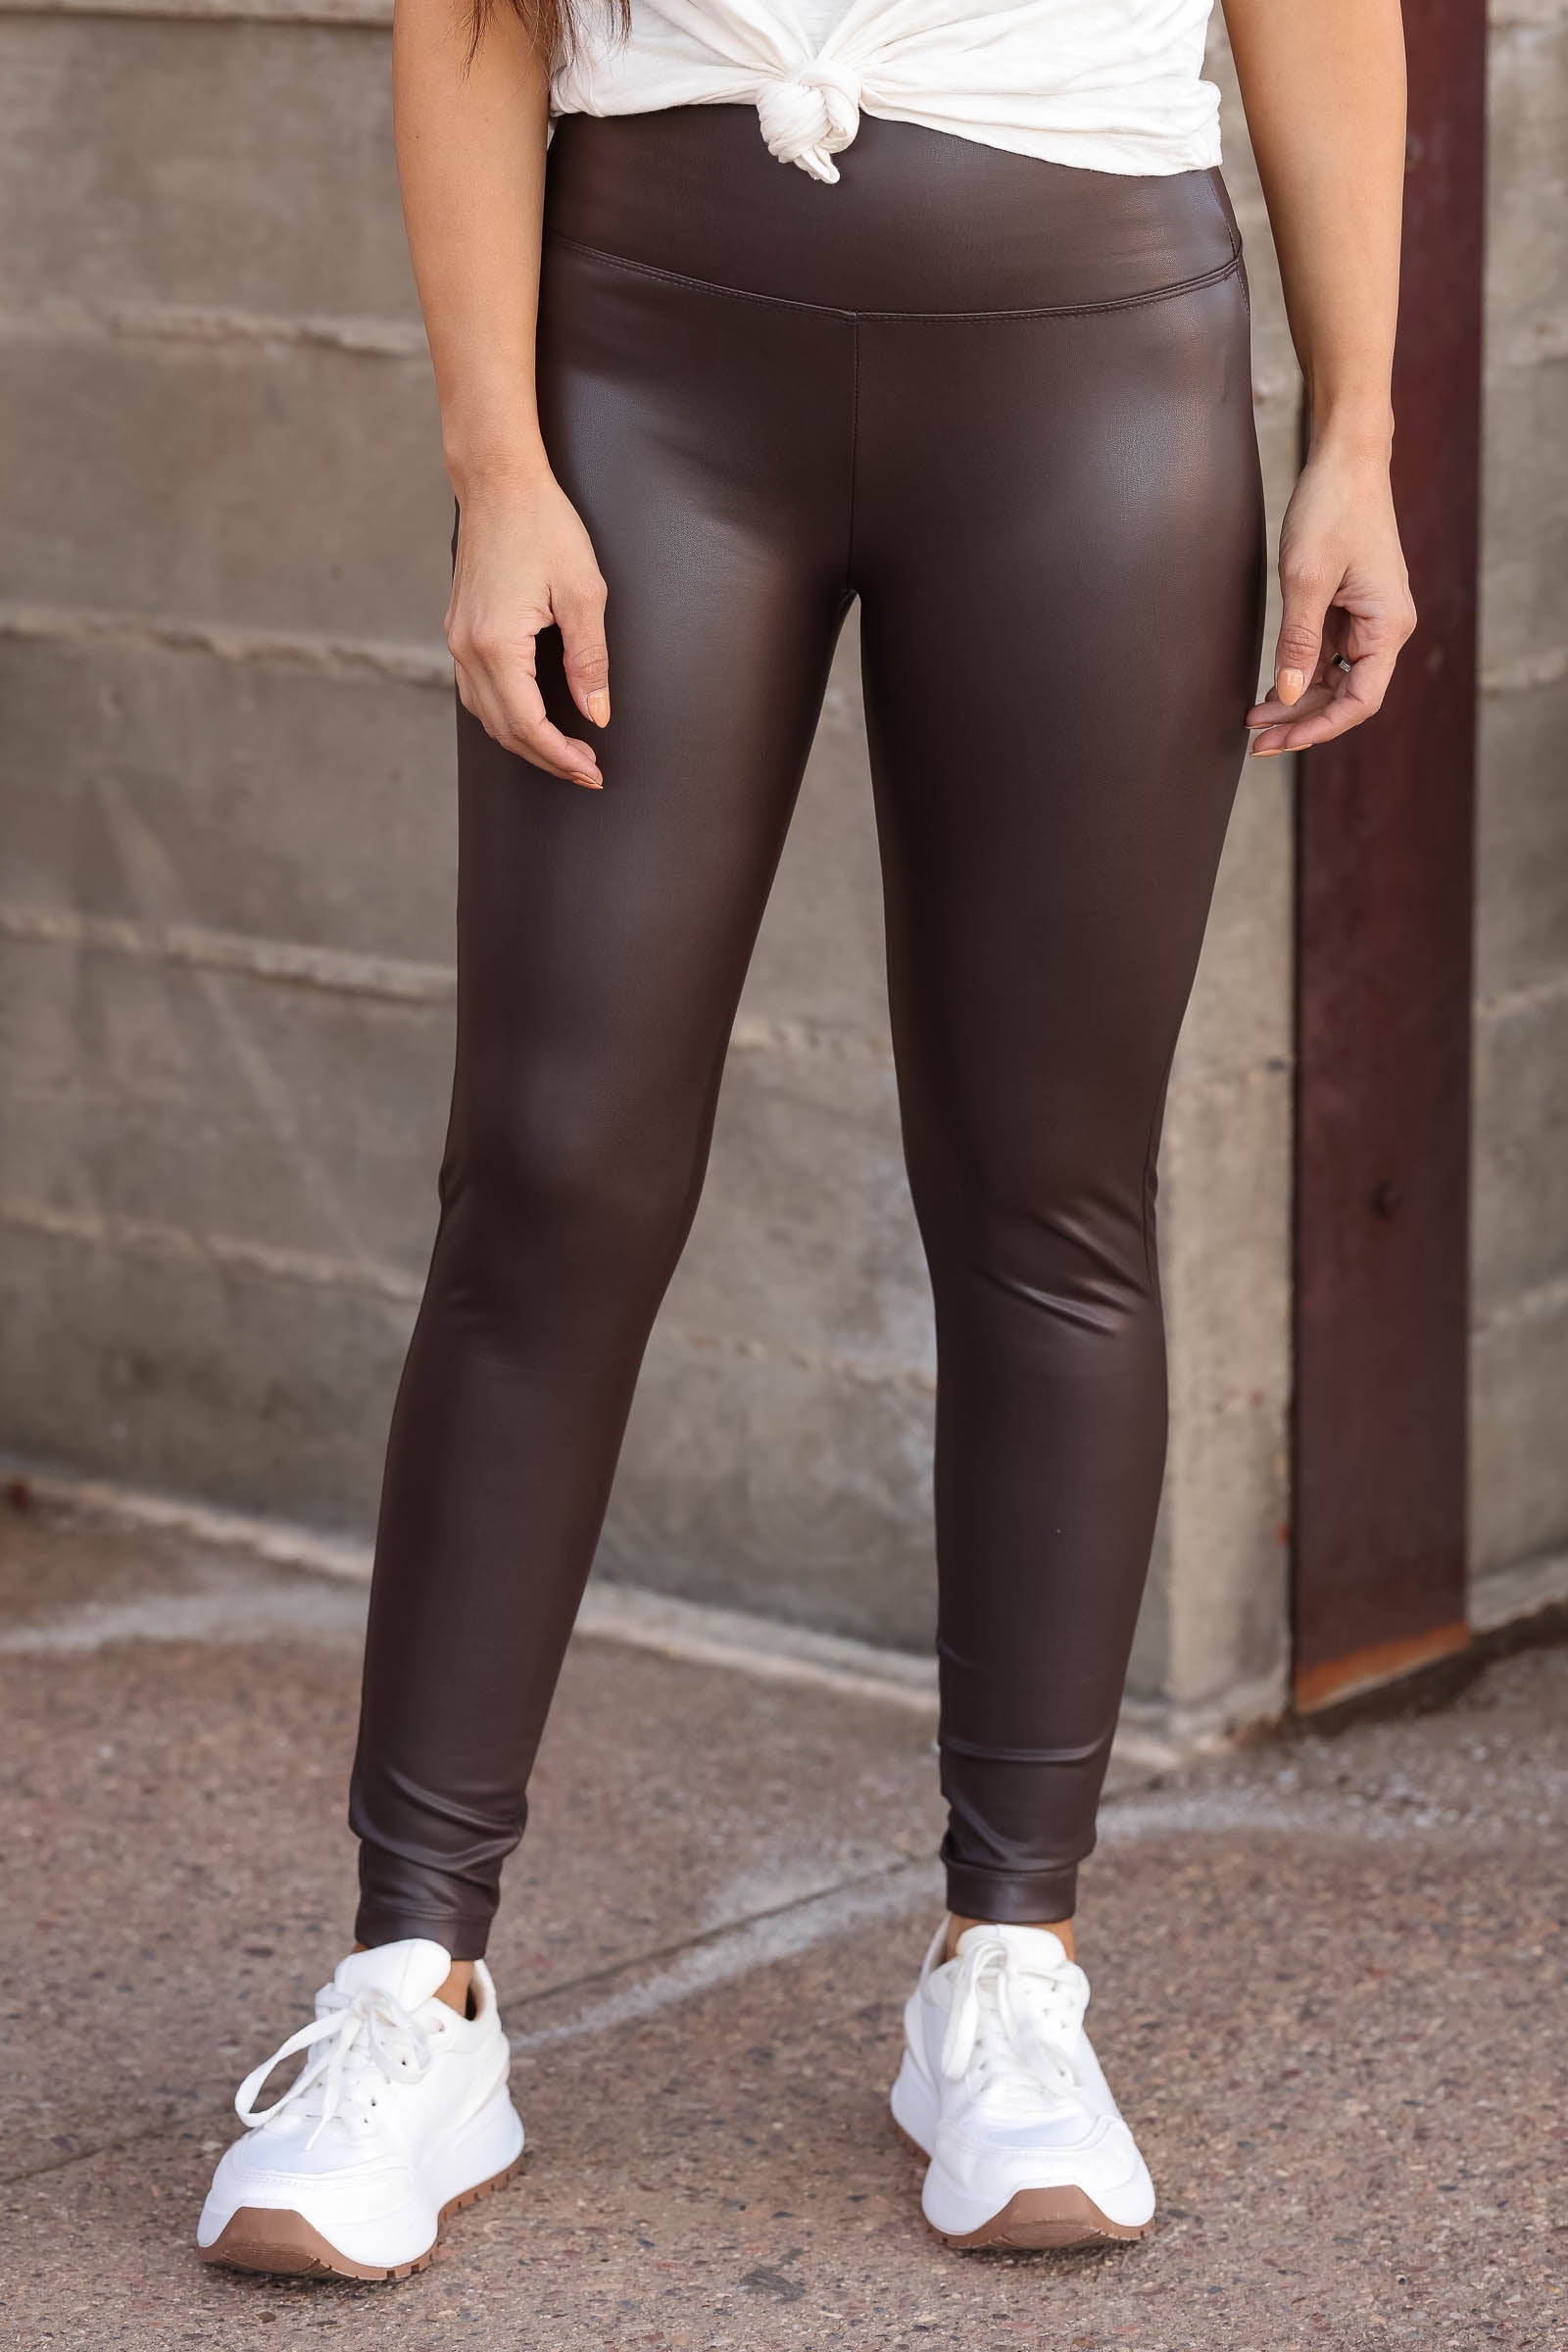 It's A Vibe Vegan Leather Leggings - Chocolate - Closet Candy Boutique